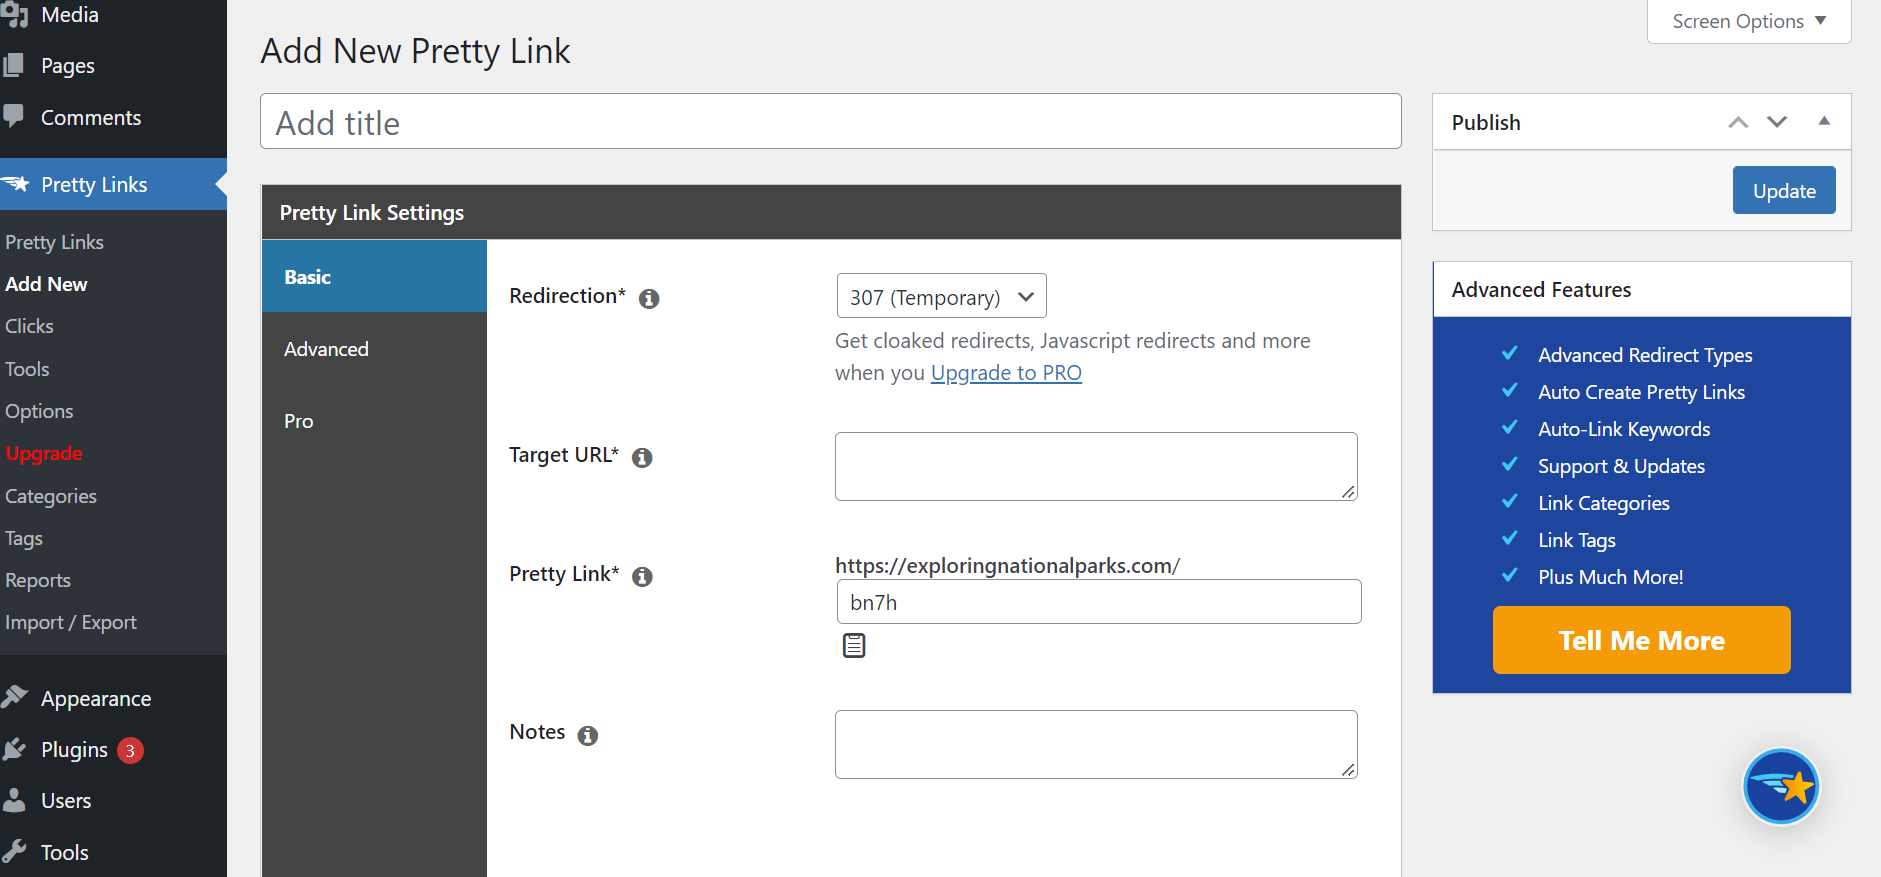 pretty links review - screenshot of adding a new pretty link